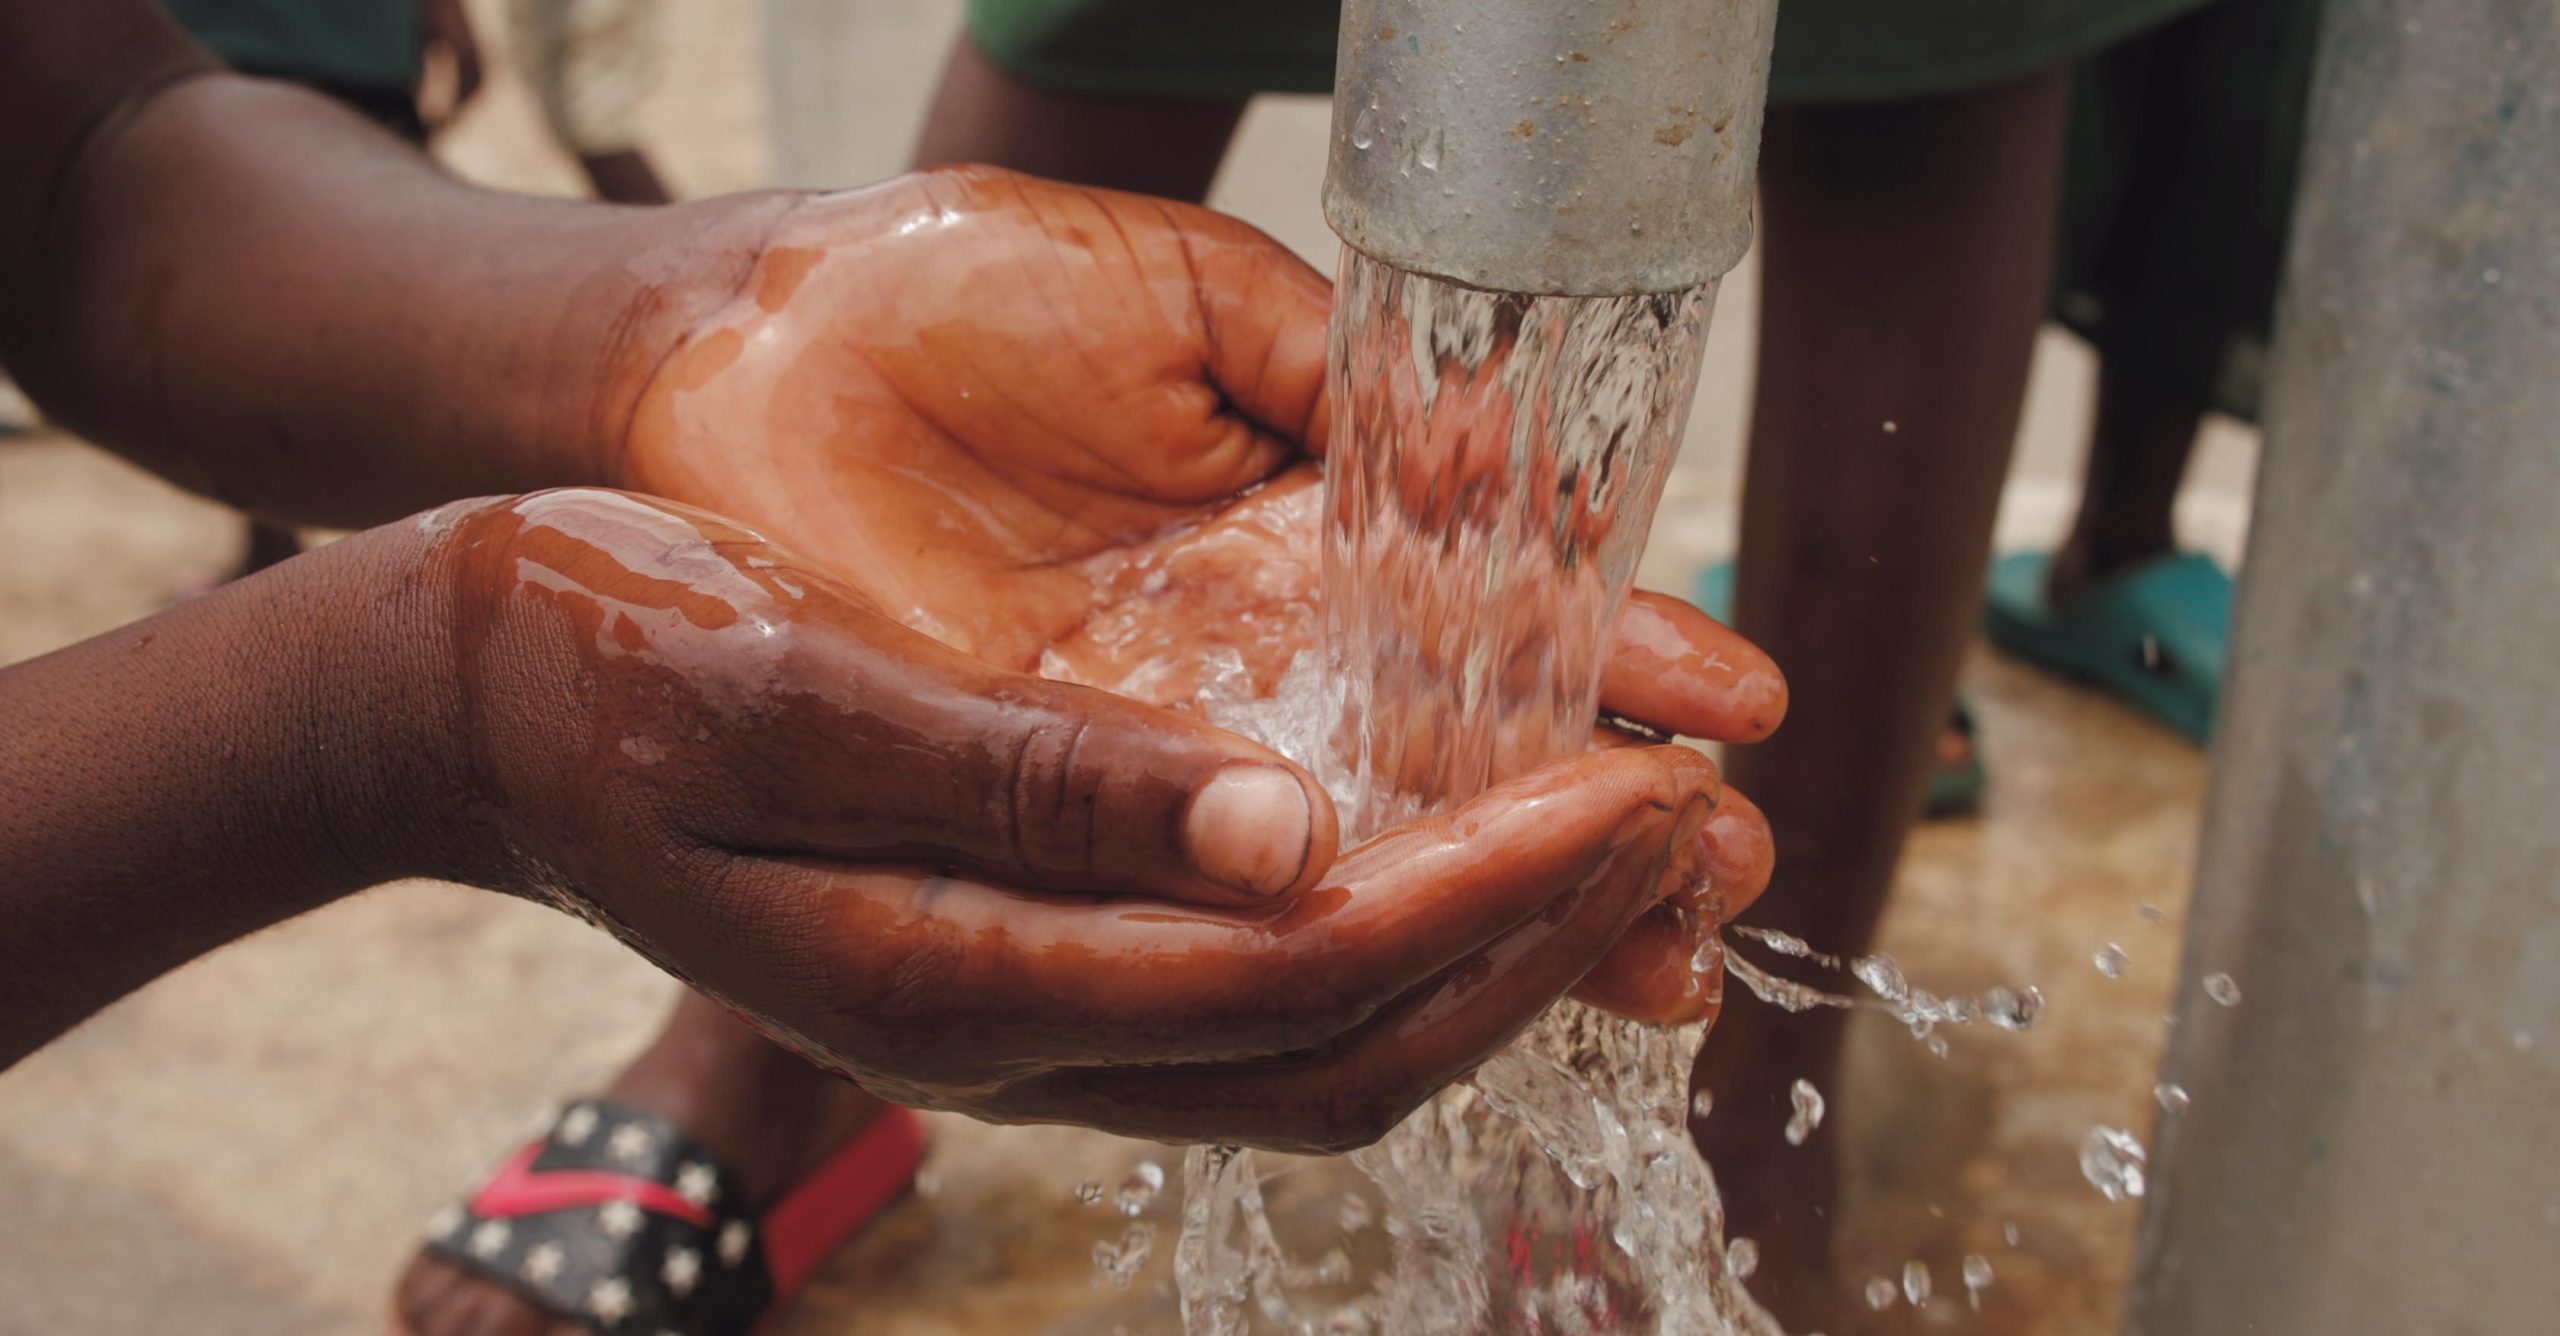 close-up-of-a-child-s-hands-catching-water-from-the-spout-of-3030281